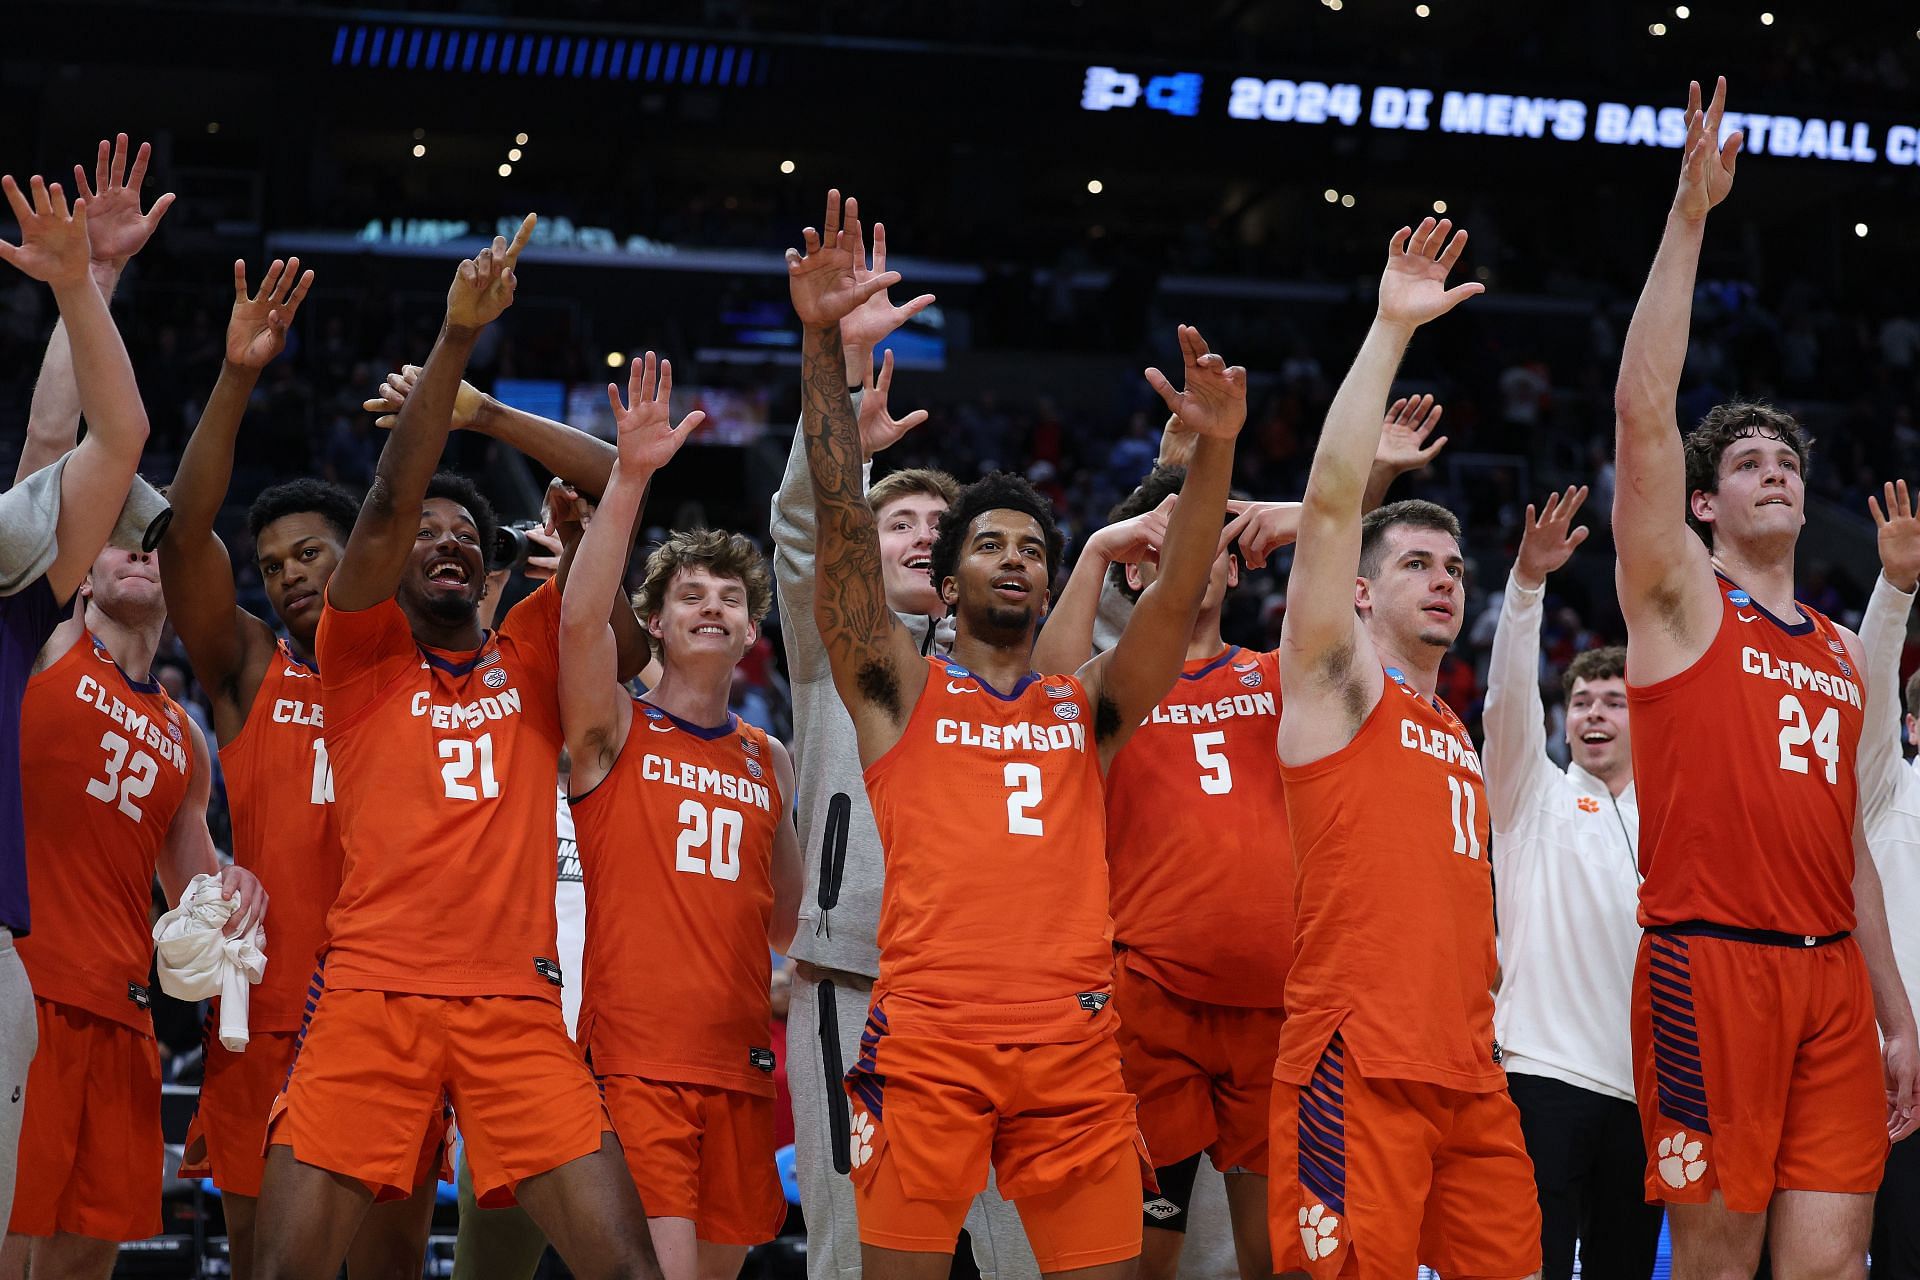 Clemson surprised Arizona to arrange an Elite Eight meeting with Alabama, which stunned North Carolina in the other Sweet 16 game on Friday in Los Angeles.